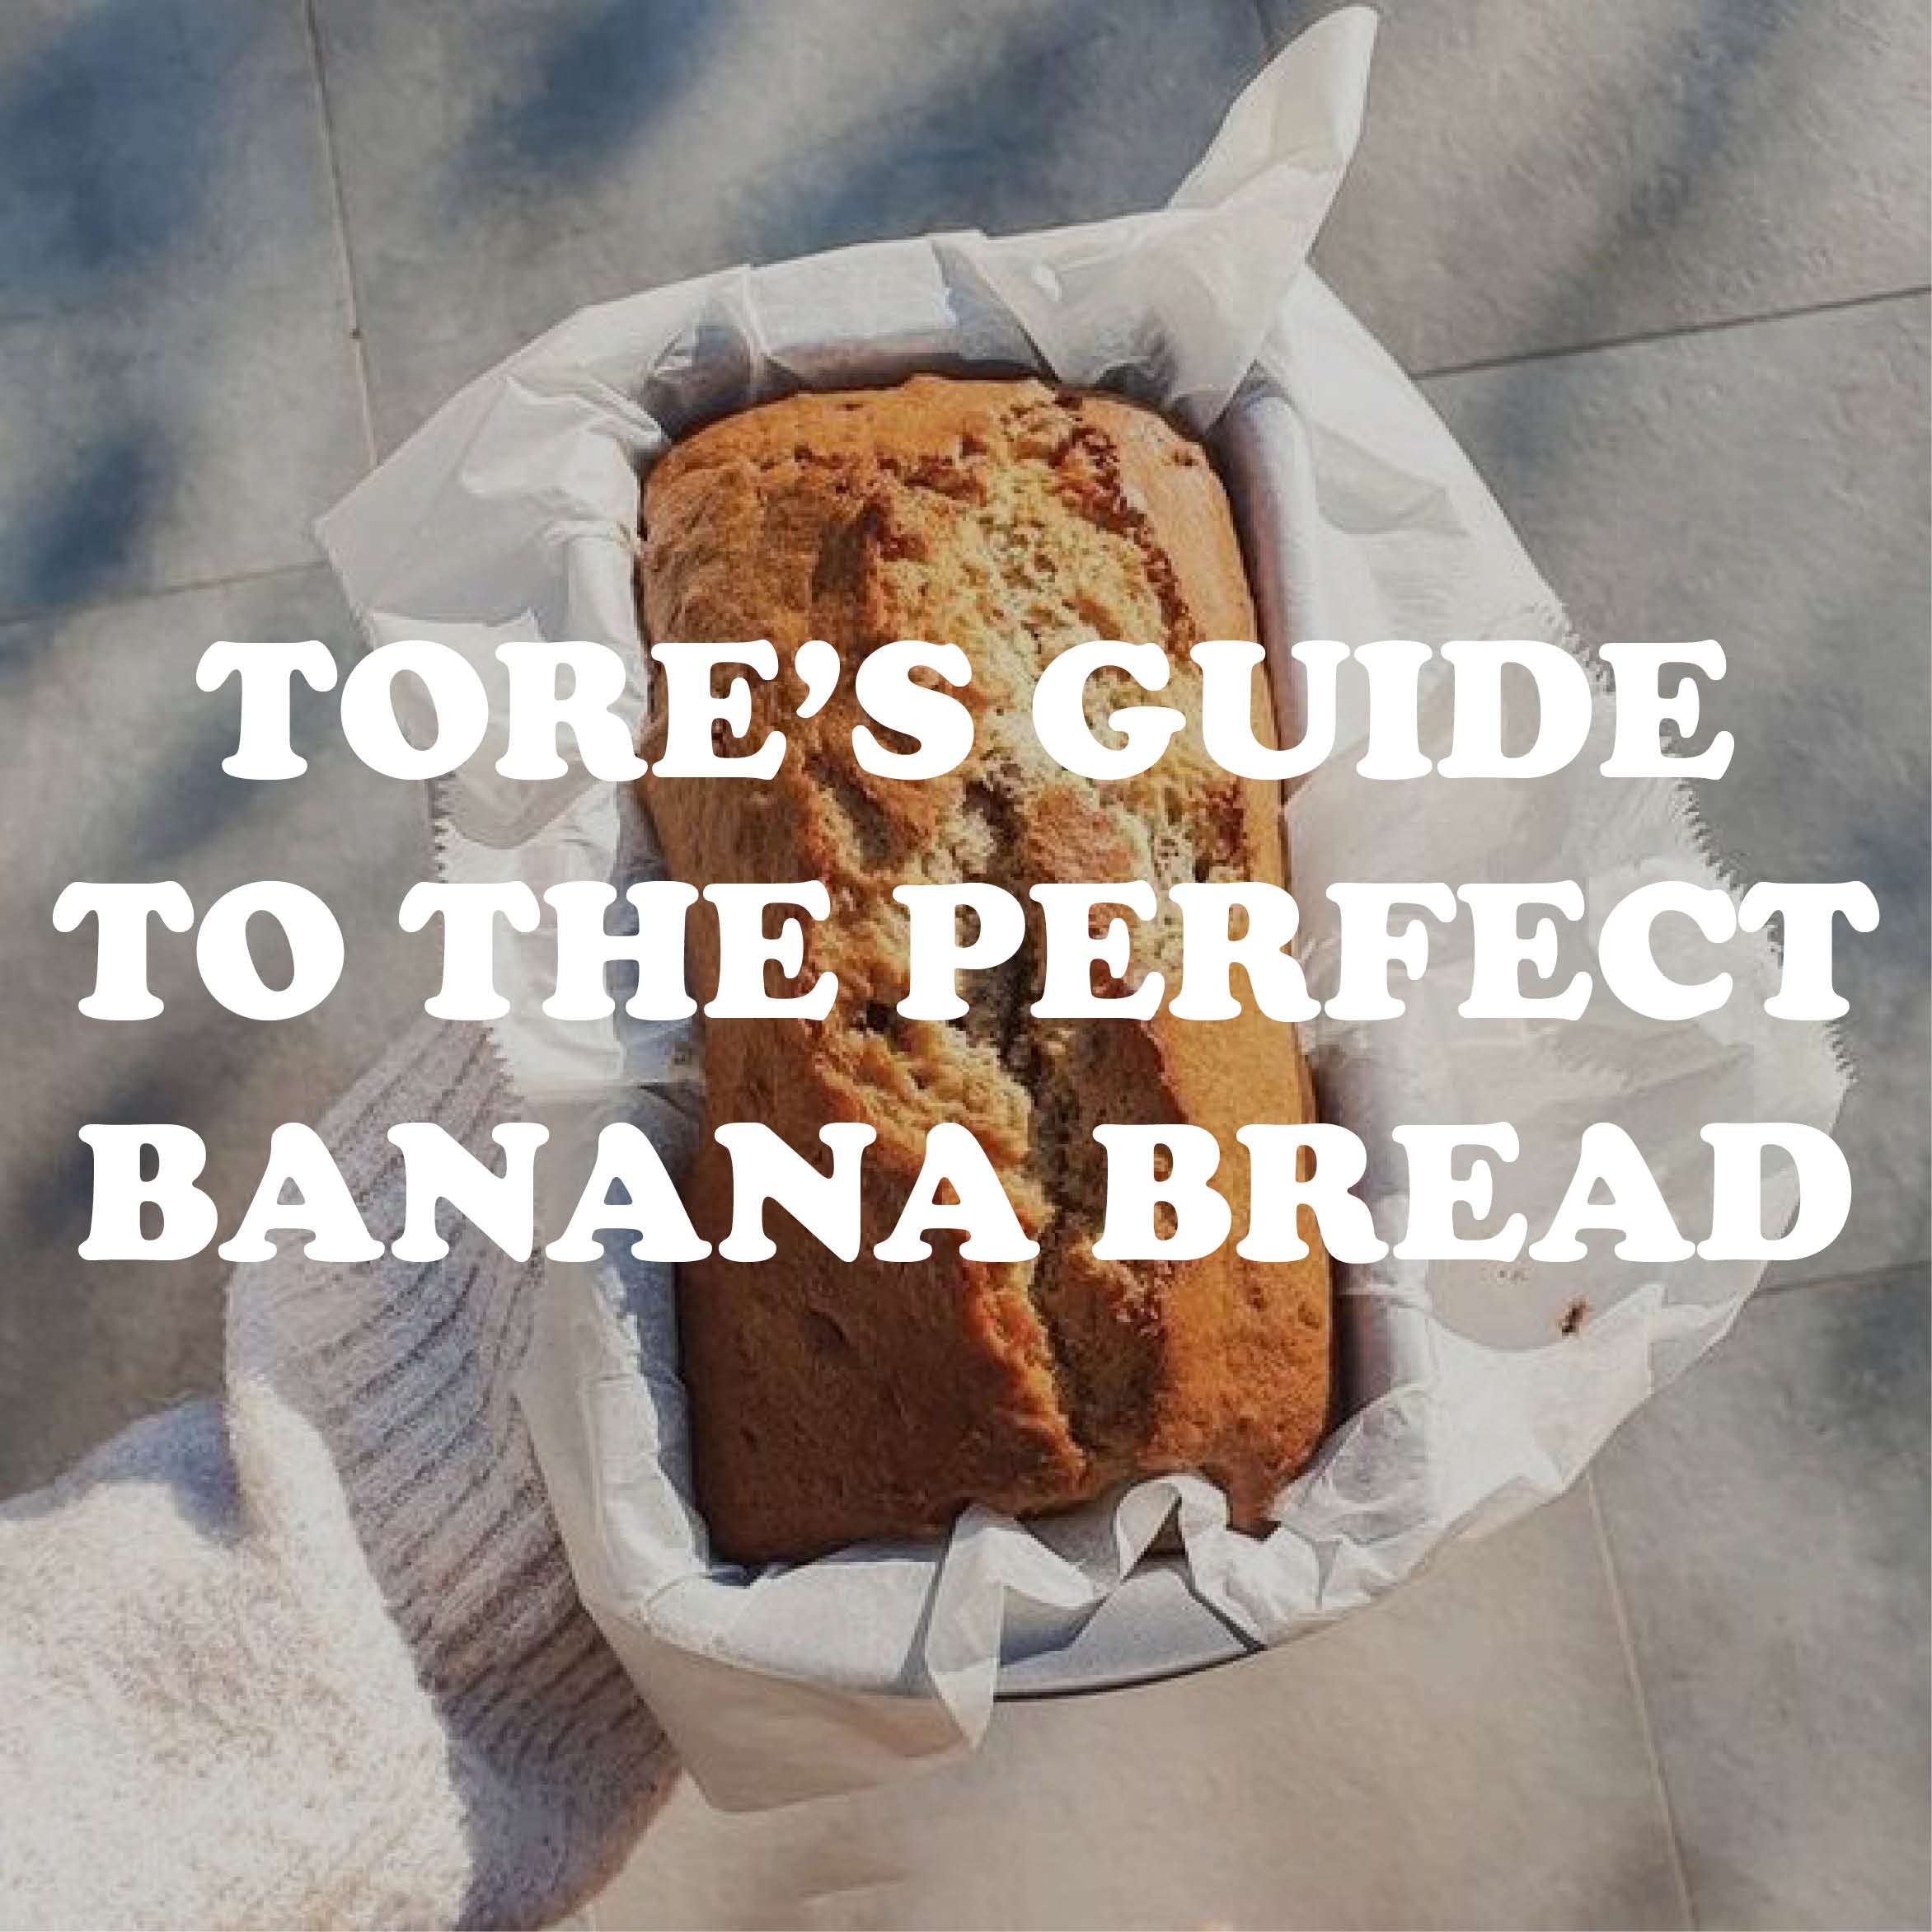 Tore’s Guide to the Perfect Banana Bread